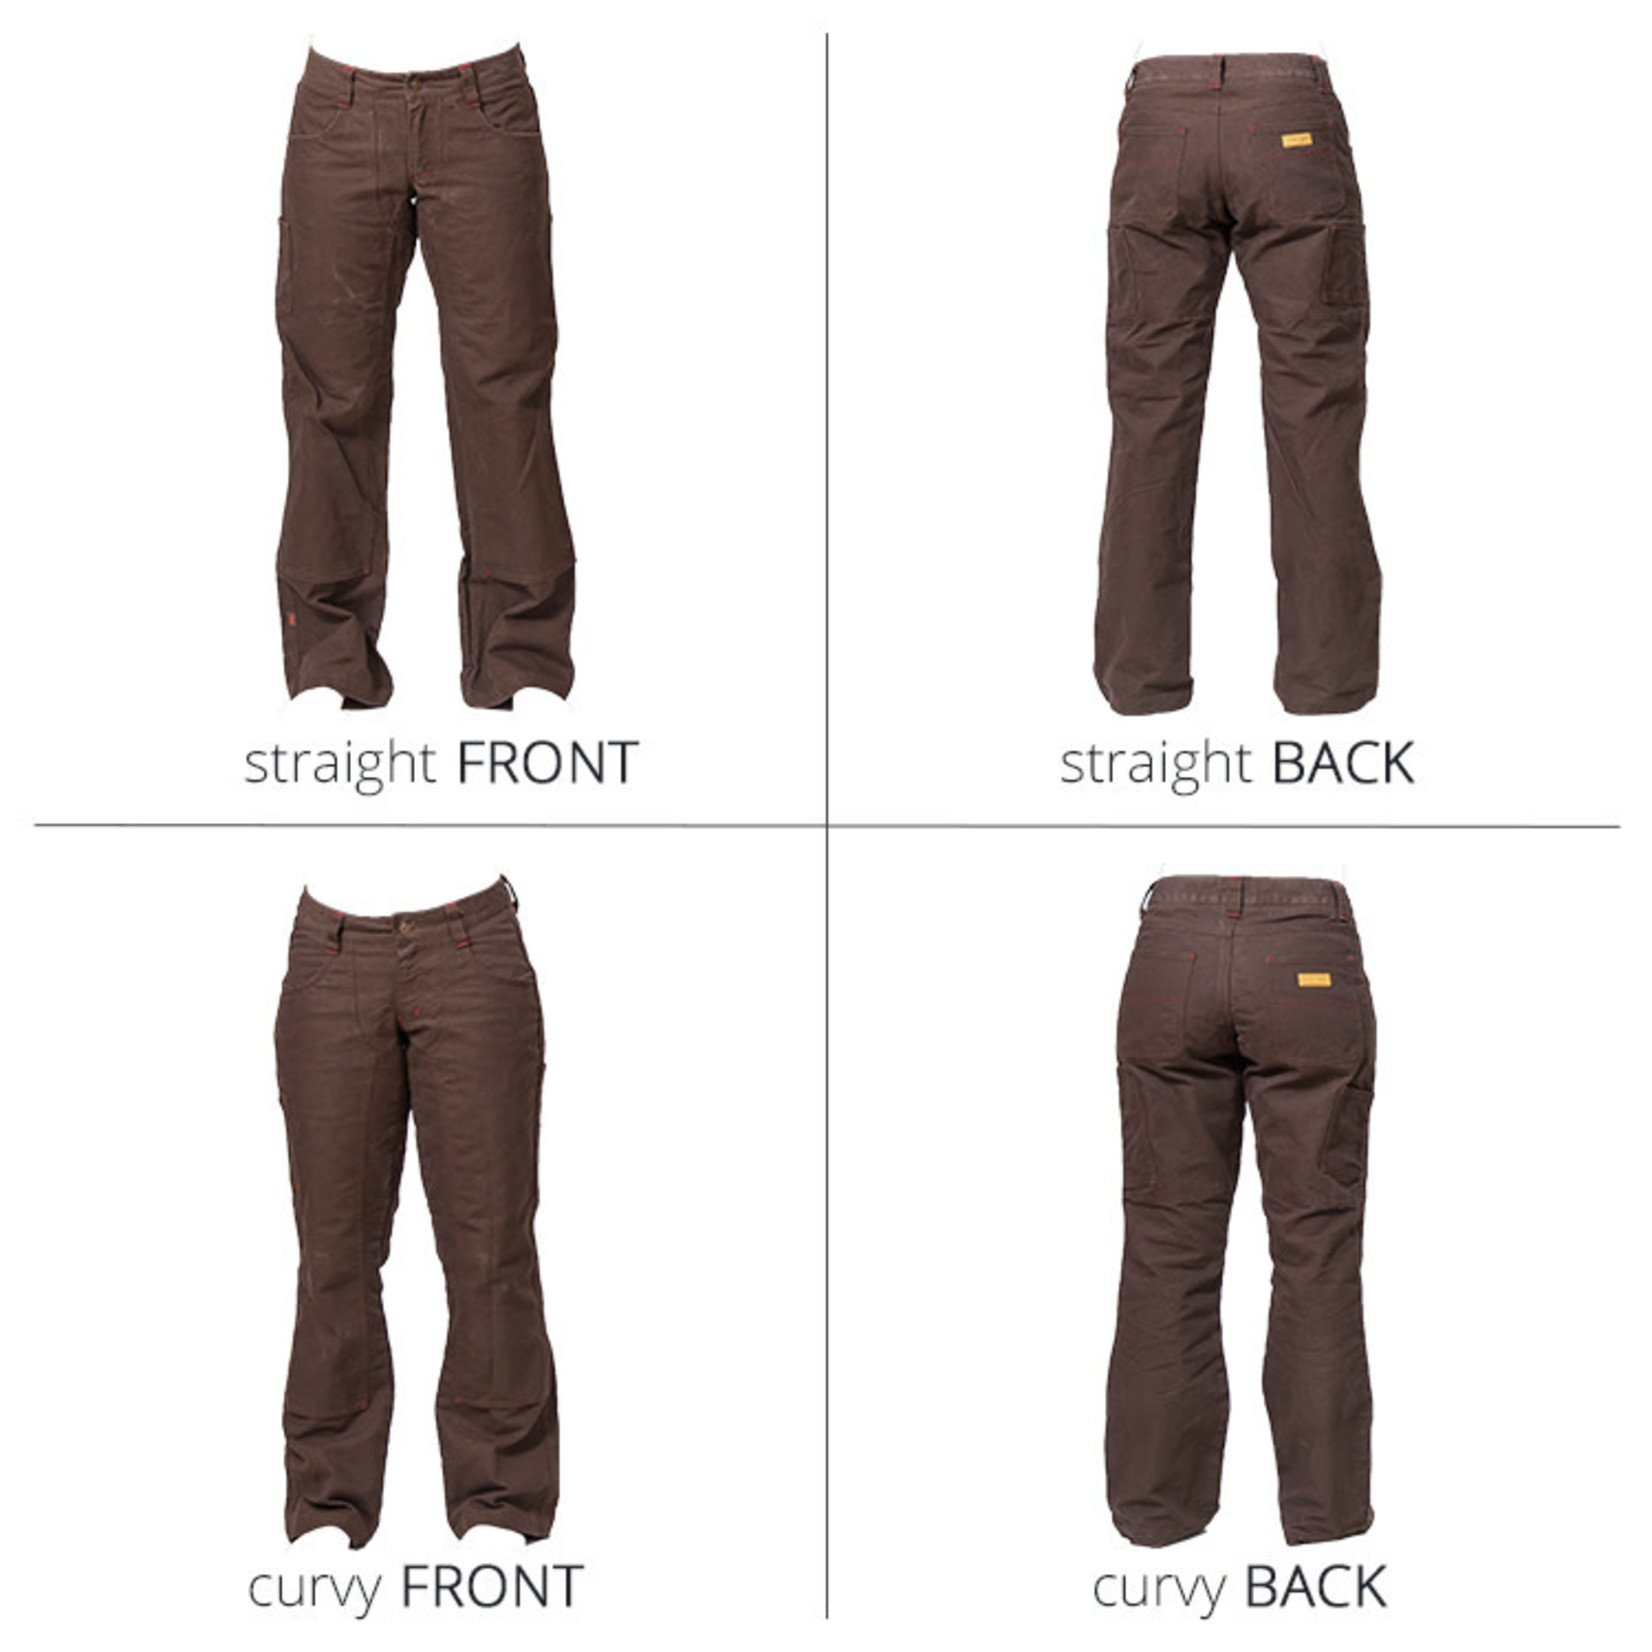 What You Need to Know About Work Pants for Women - IronPros